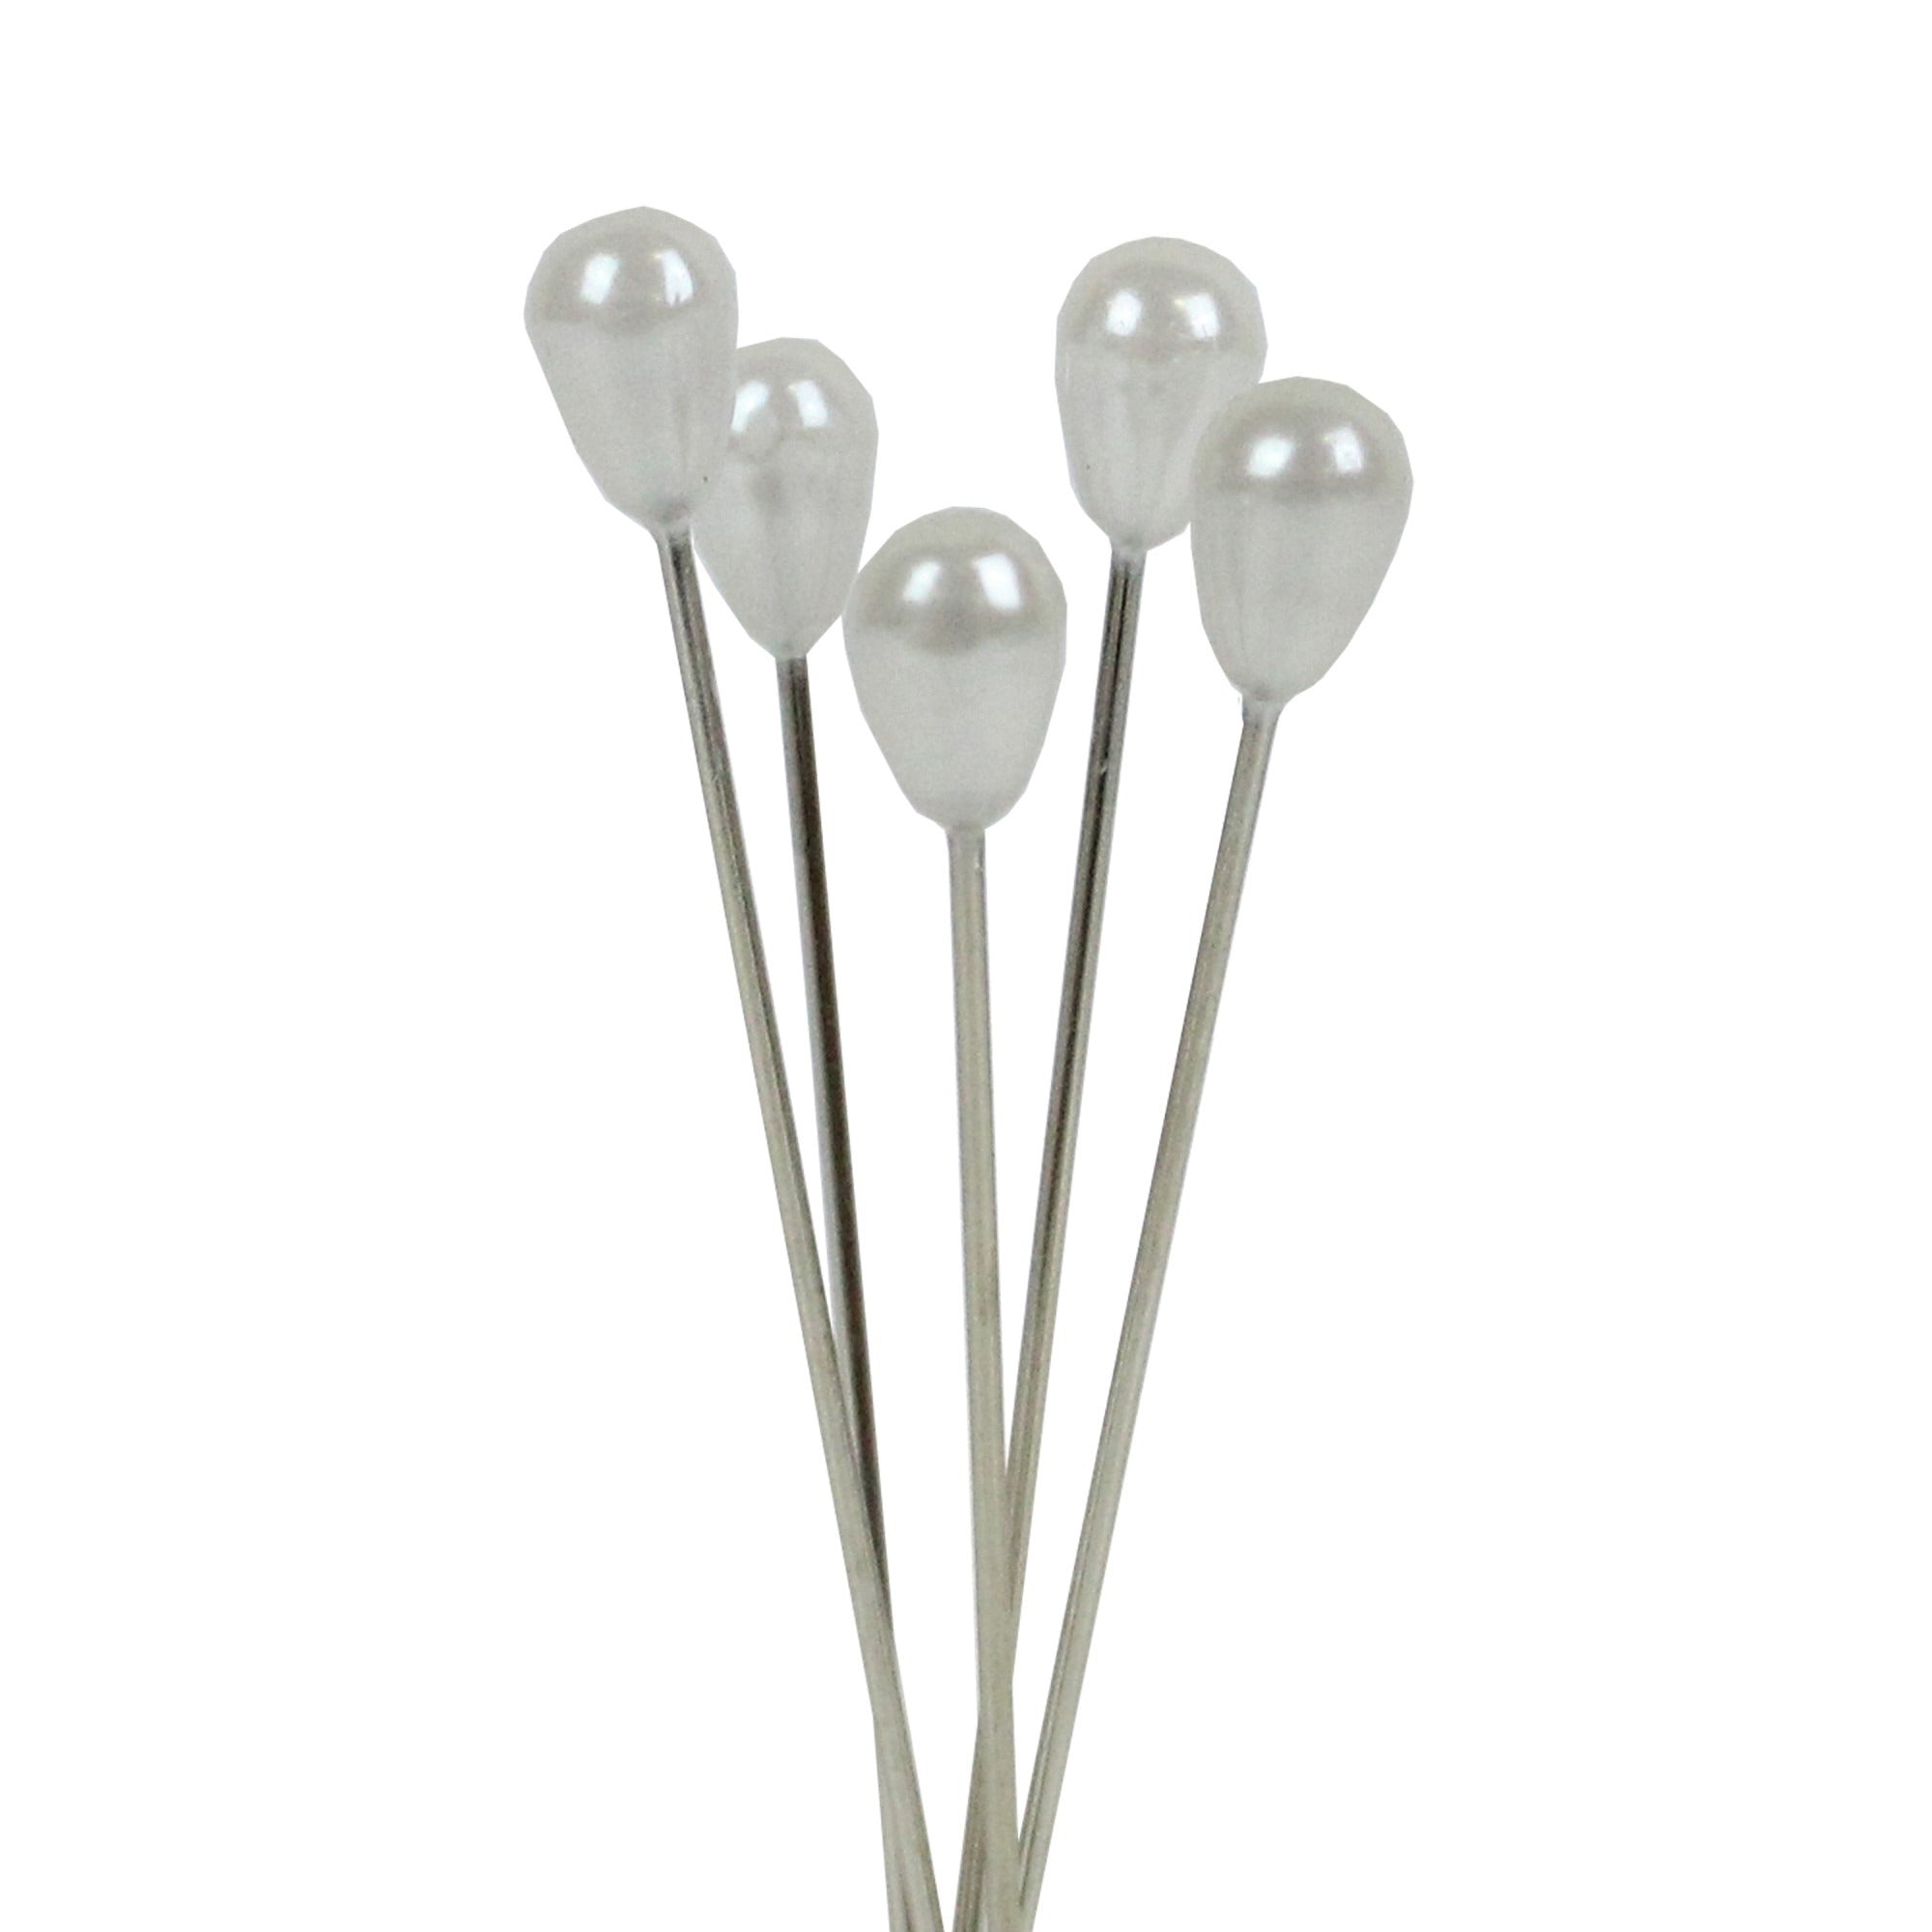 View 4cm Pear Shaped White Pearl Pins information